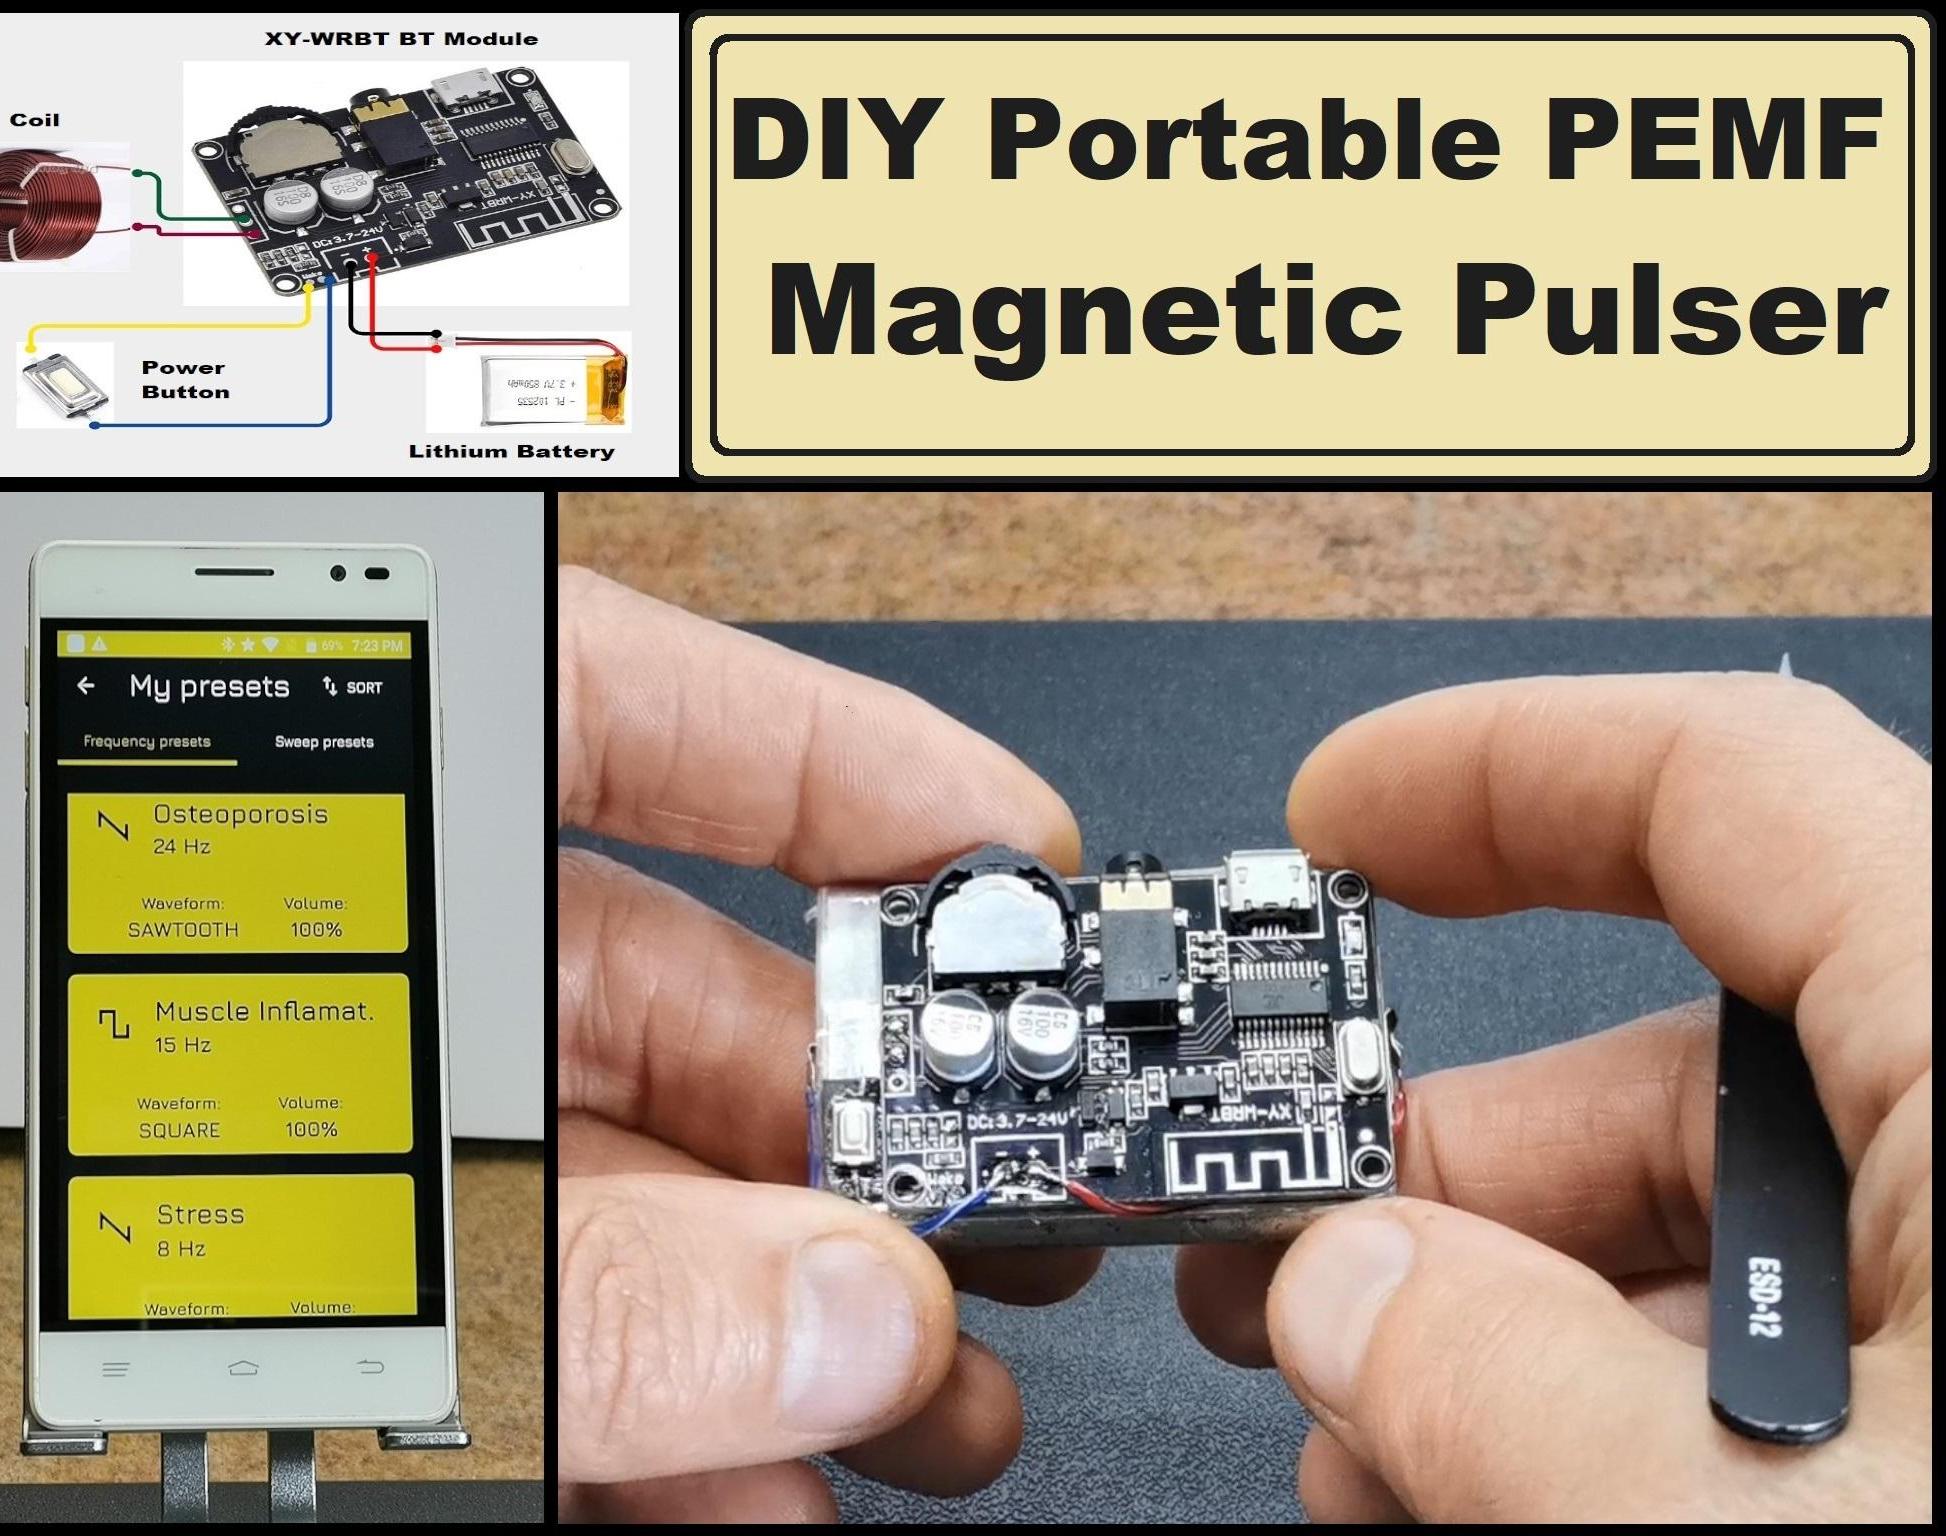 How to Make Simple Portable PEMF Magnetic Pulser